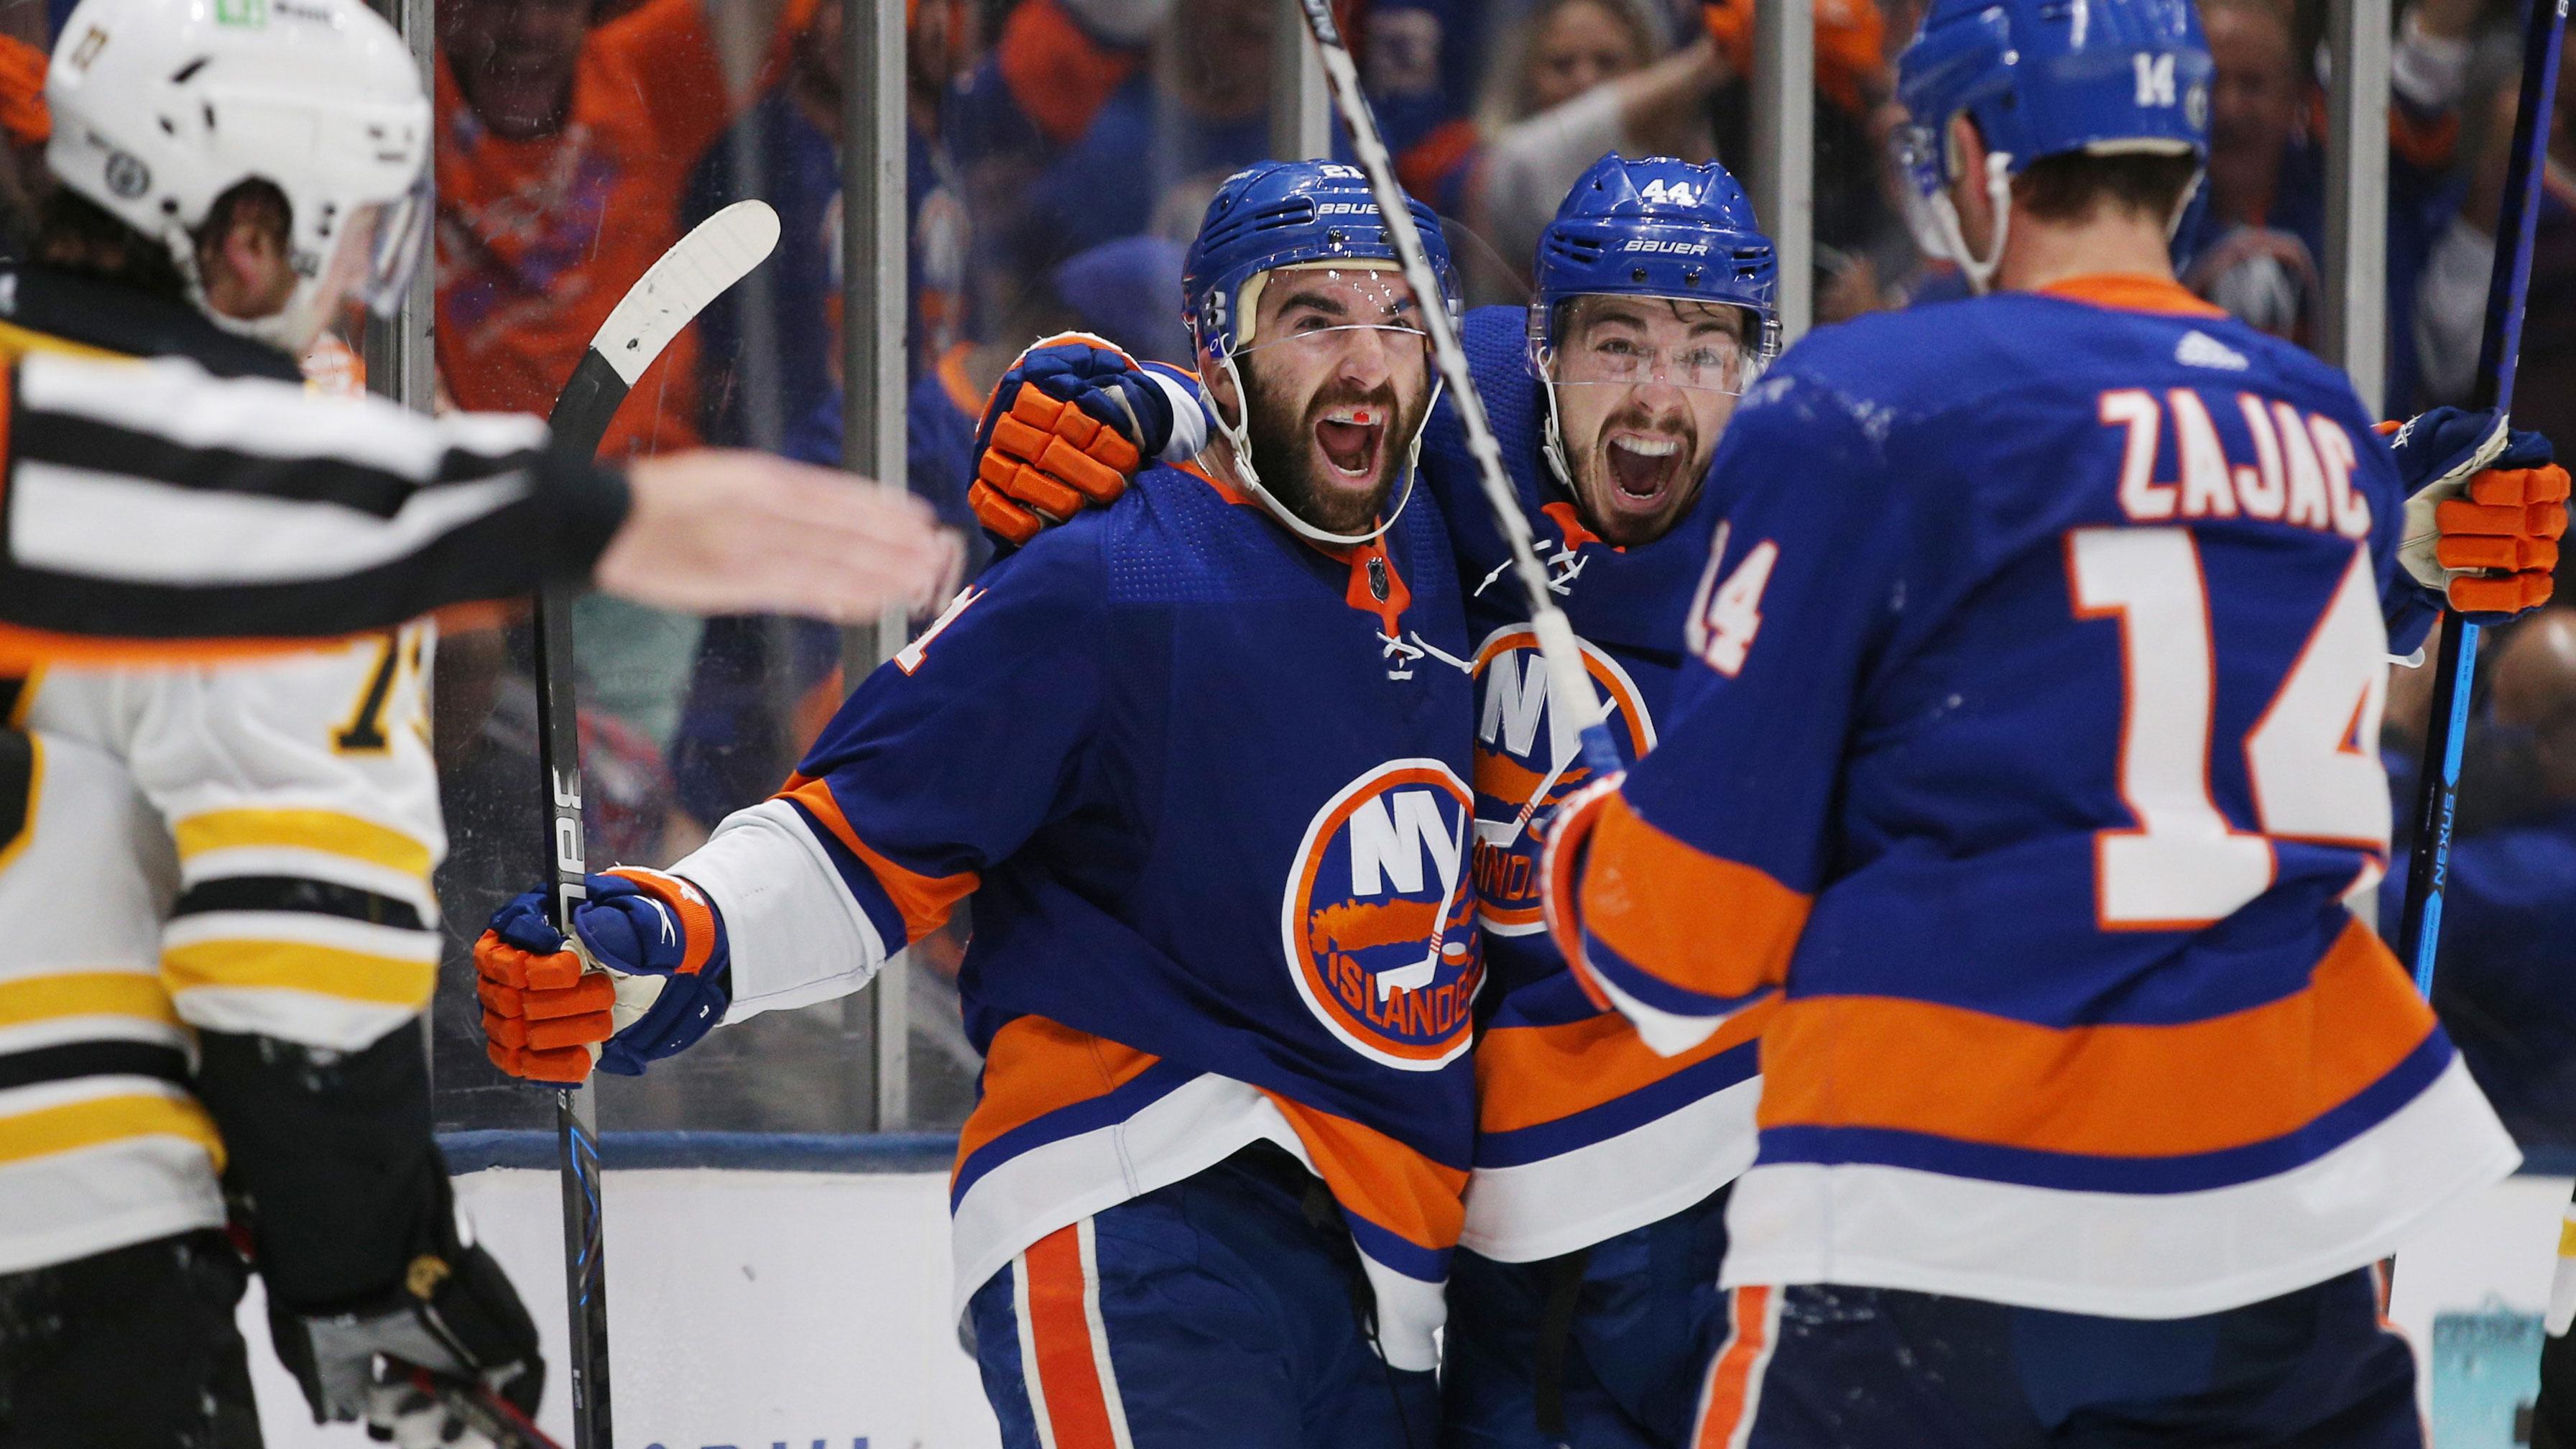 Jun 9, 2021; Uniondale, New York, USA; New York Islanders right wing Kyle Palmieri (21) celebrates his goal against the Boston Bruins with center Jean-Gabriel Pageau (44) and center Travis Zajac (14) during the second period of game six of the second round of the 2021 Stanley Cup Playoffs at Nassau Veterans Memorial Coliseum. / Brad Penner-USA TODAY Sports